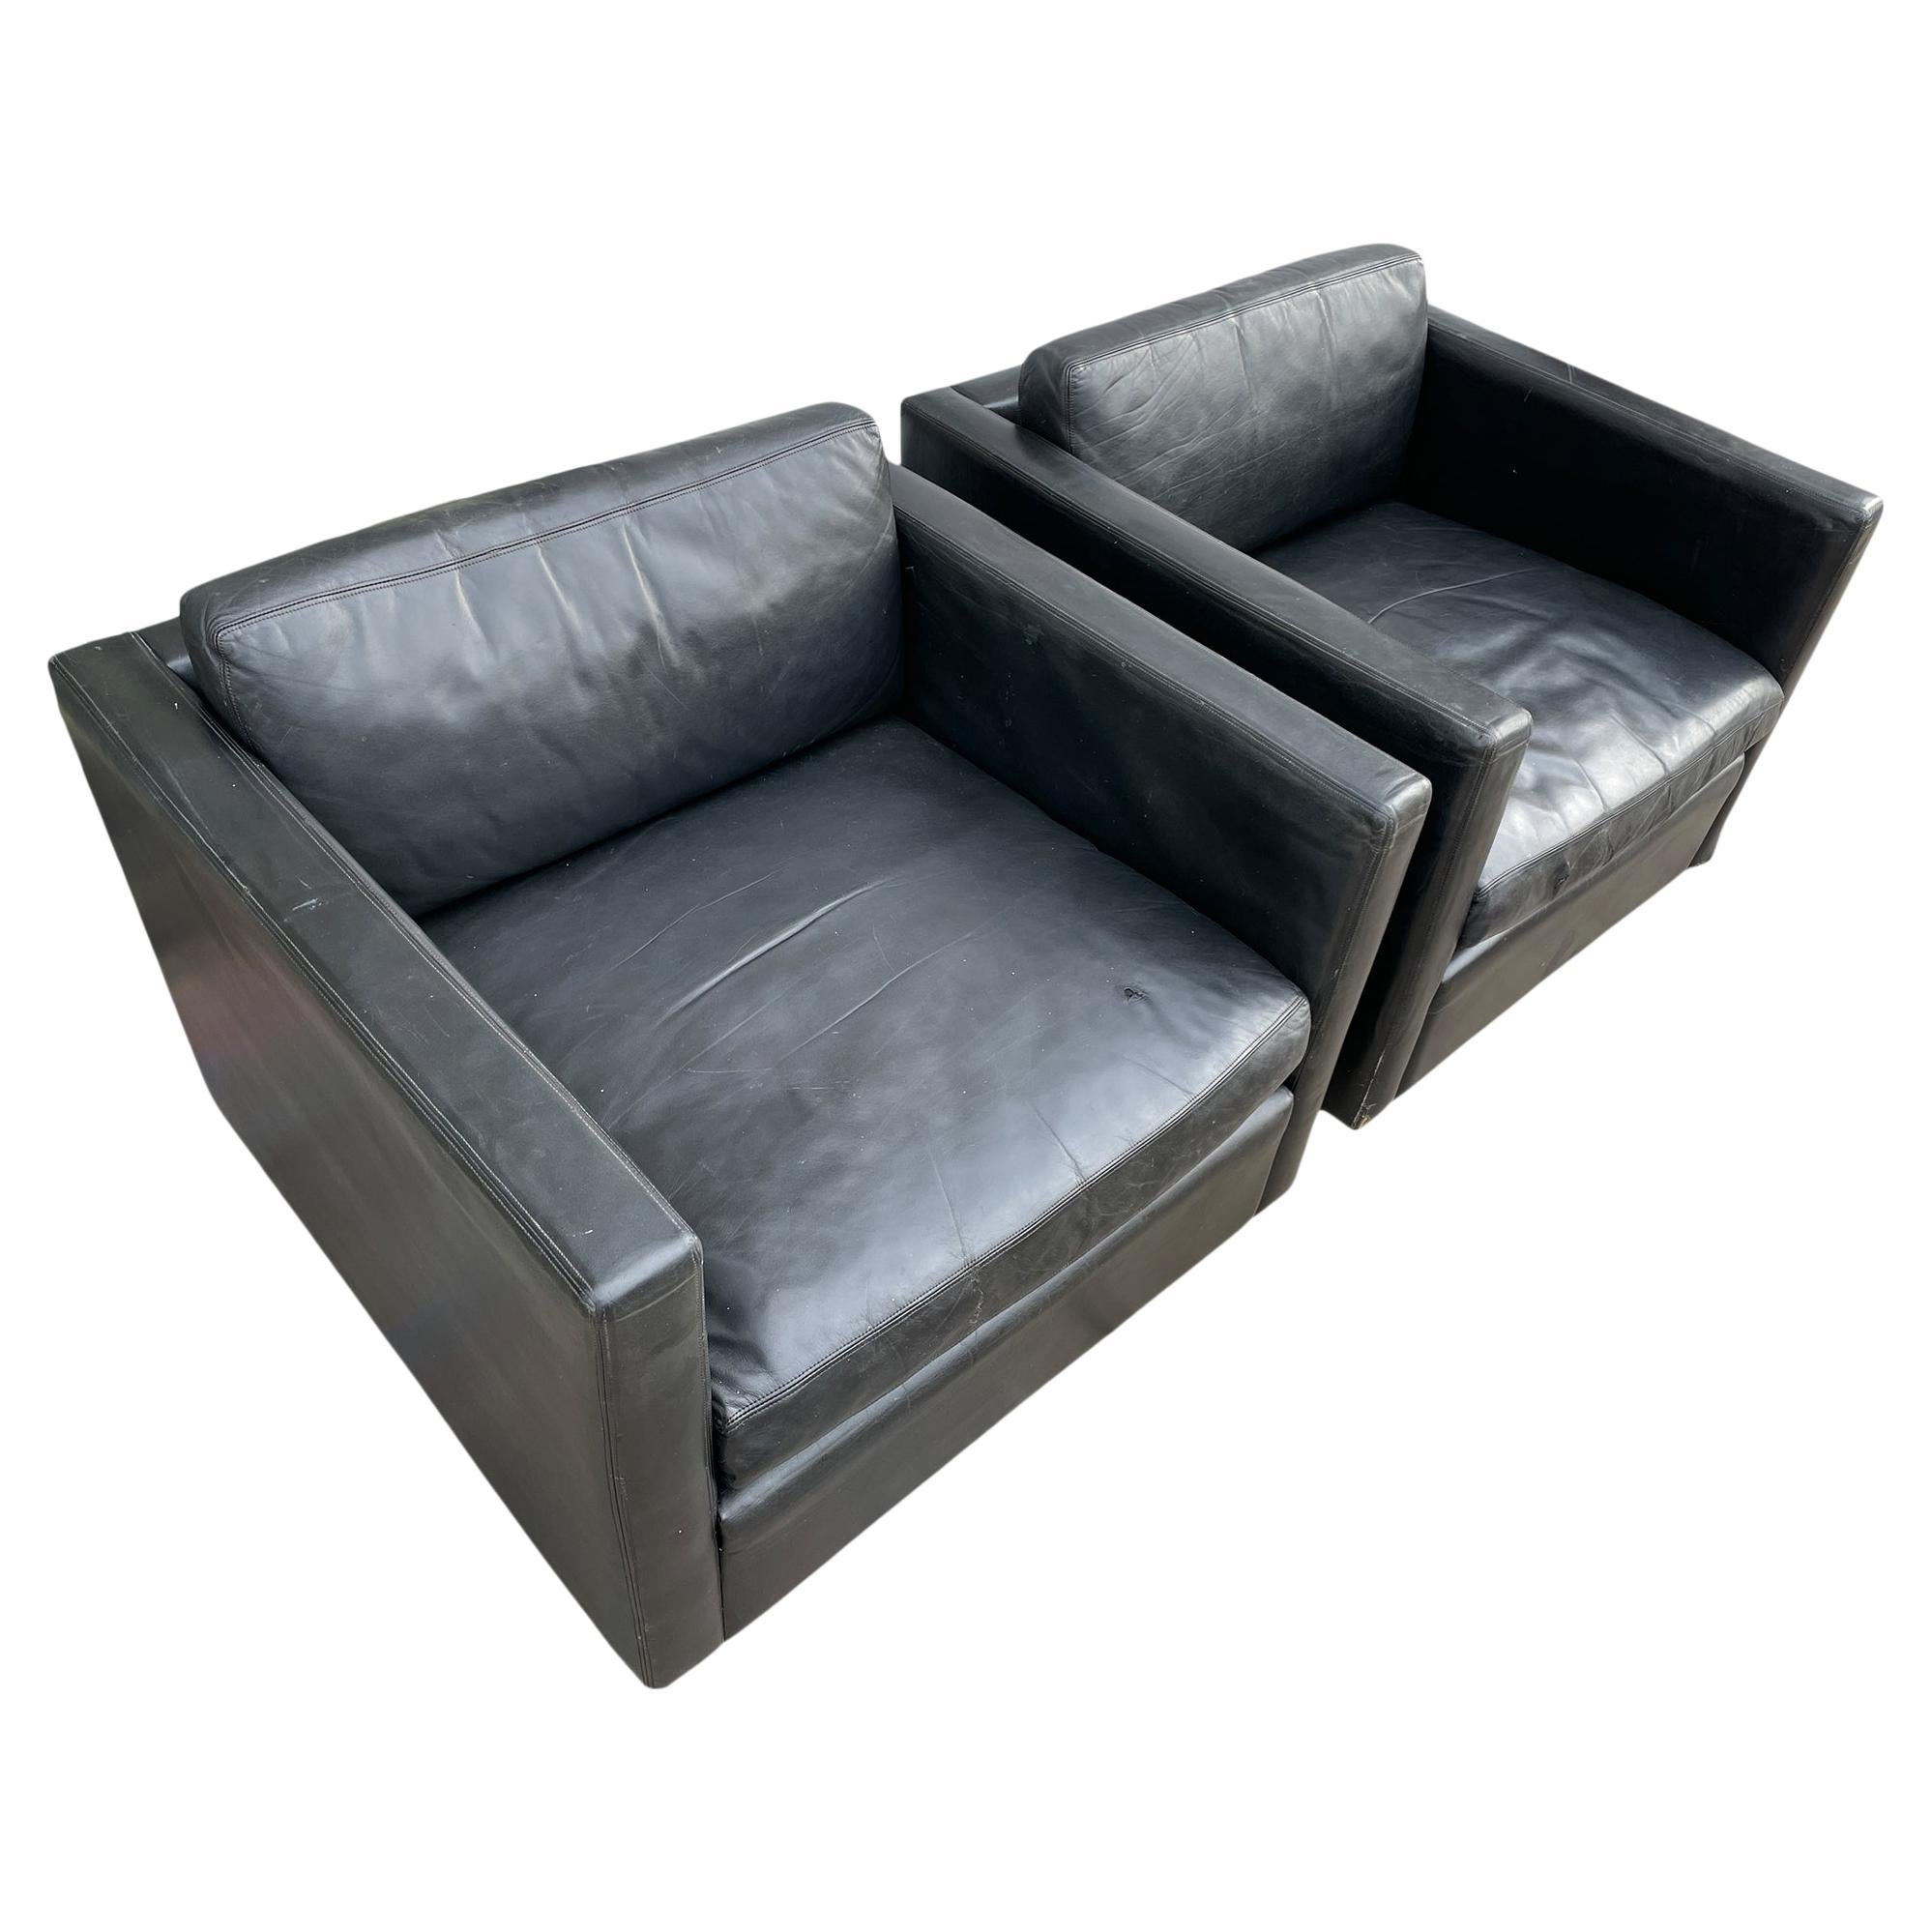 Mid-Century Modern Pfister Cube Lounge Chairs for Knoll in Black Leather